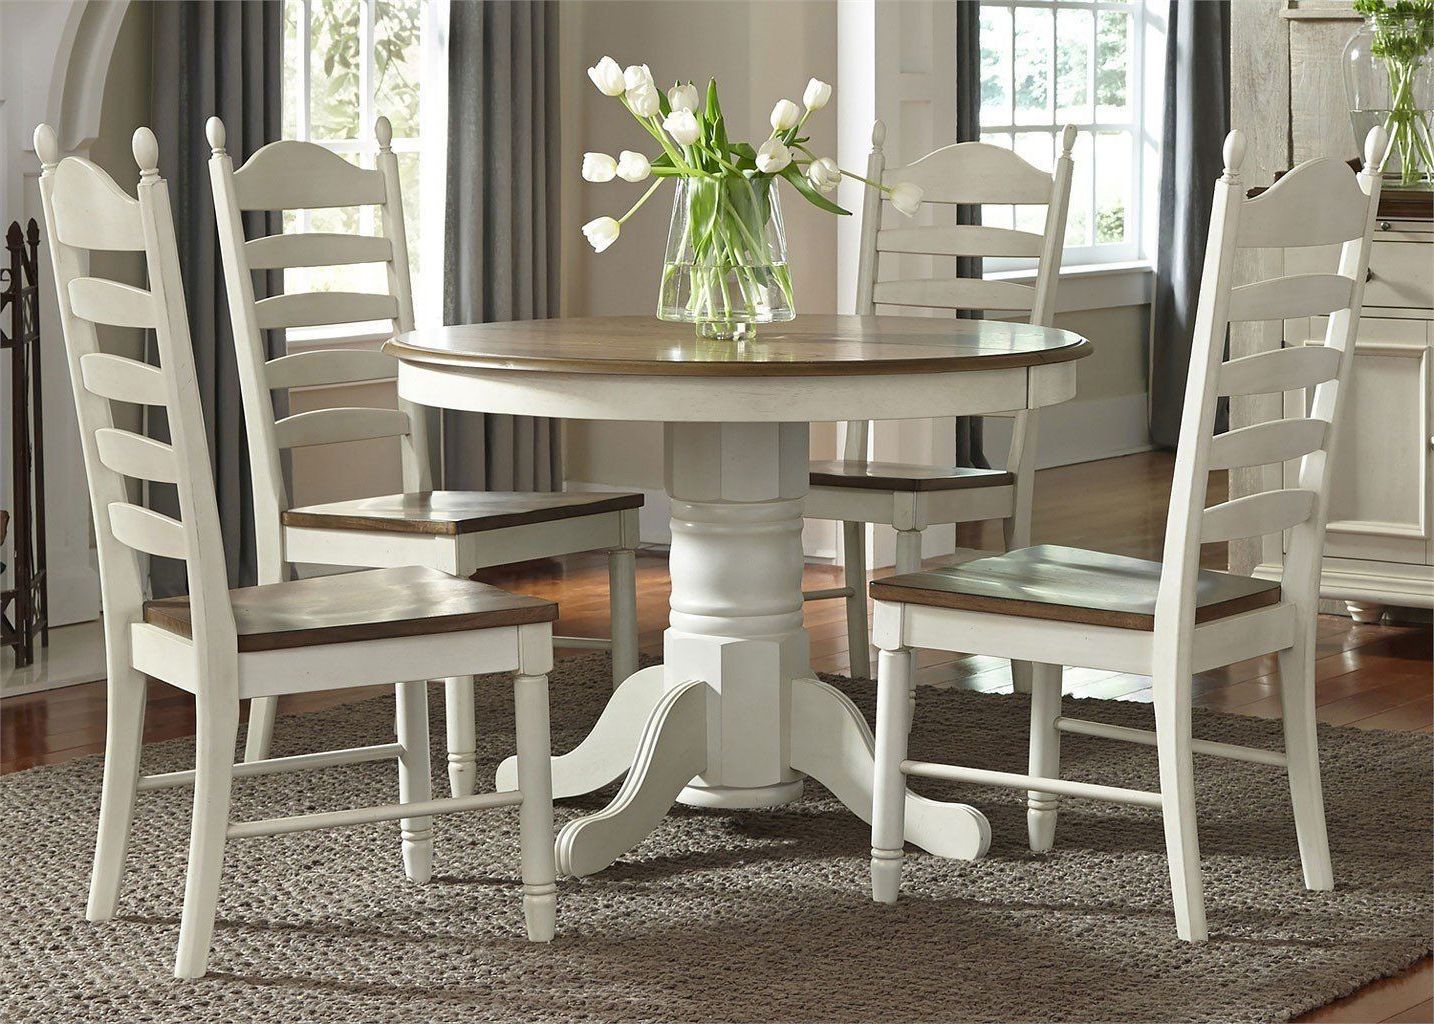 Springfield Round Dining Room Set Liberty Furniture With Regard To 2020 Larkin  (View 7 of 20)